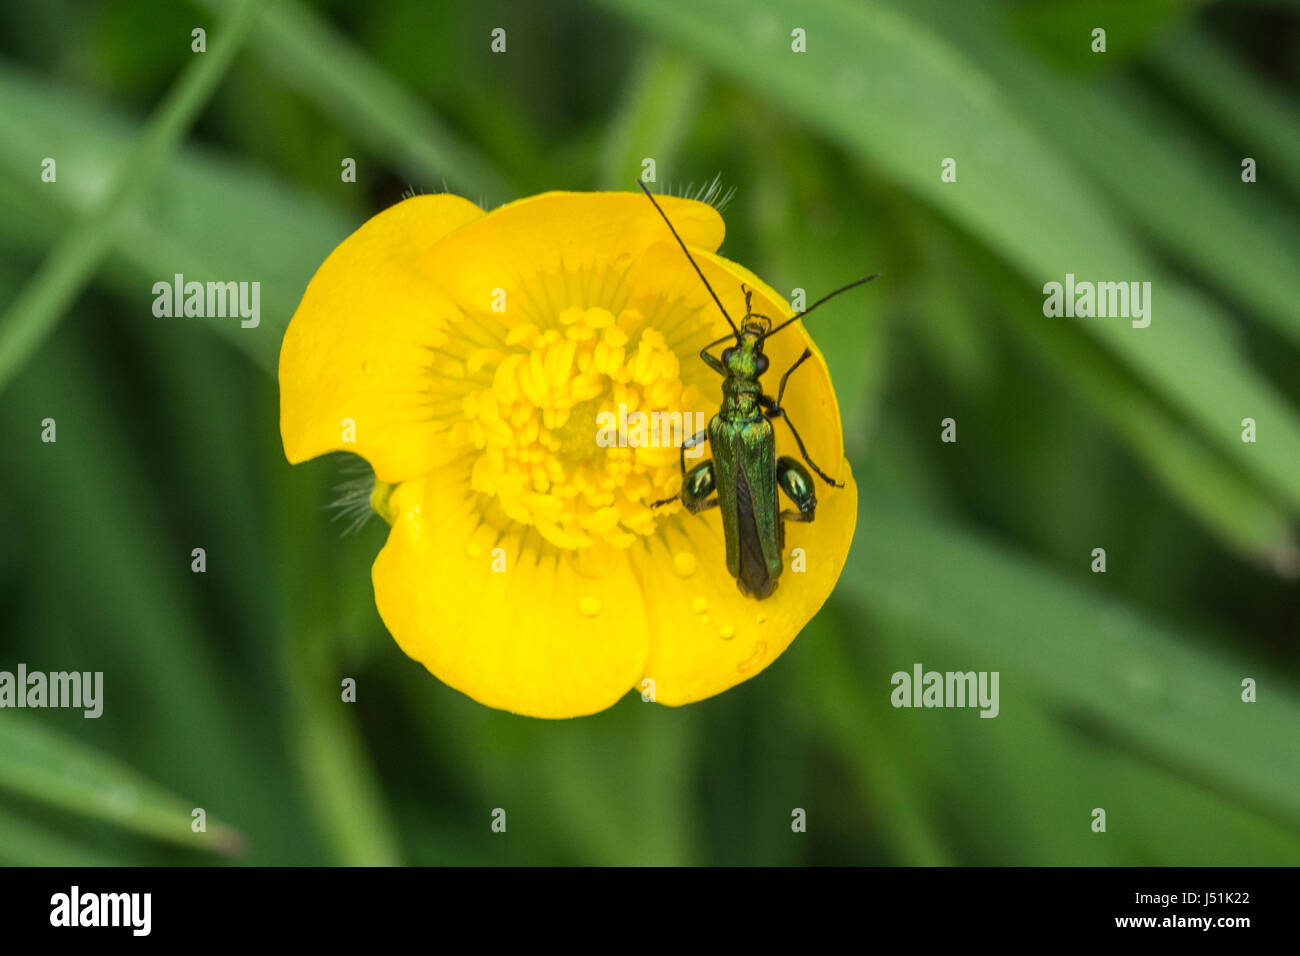 Swollen-thighed beetle (Oedemera nobilis) on buttercup Stock Photo